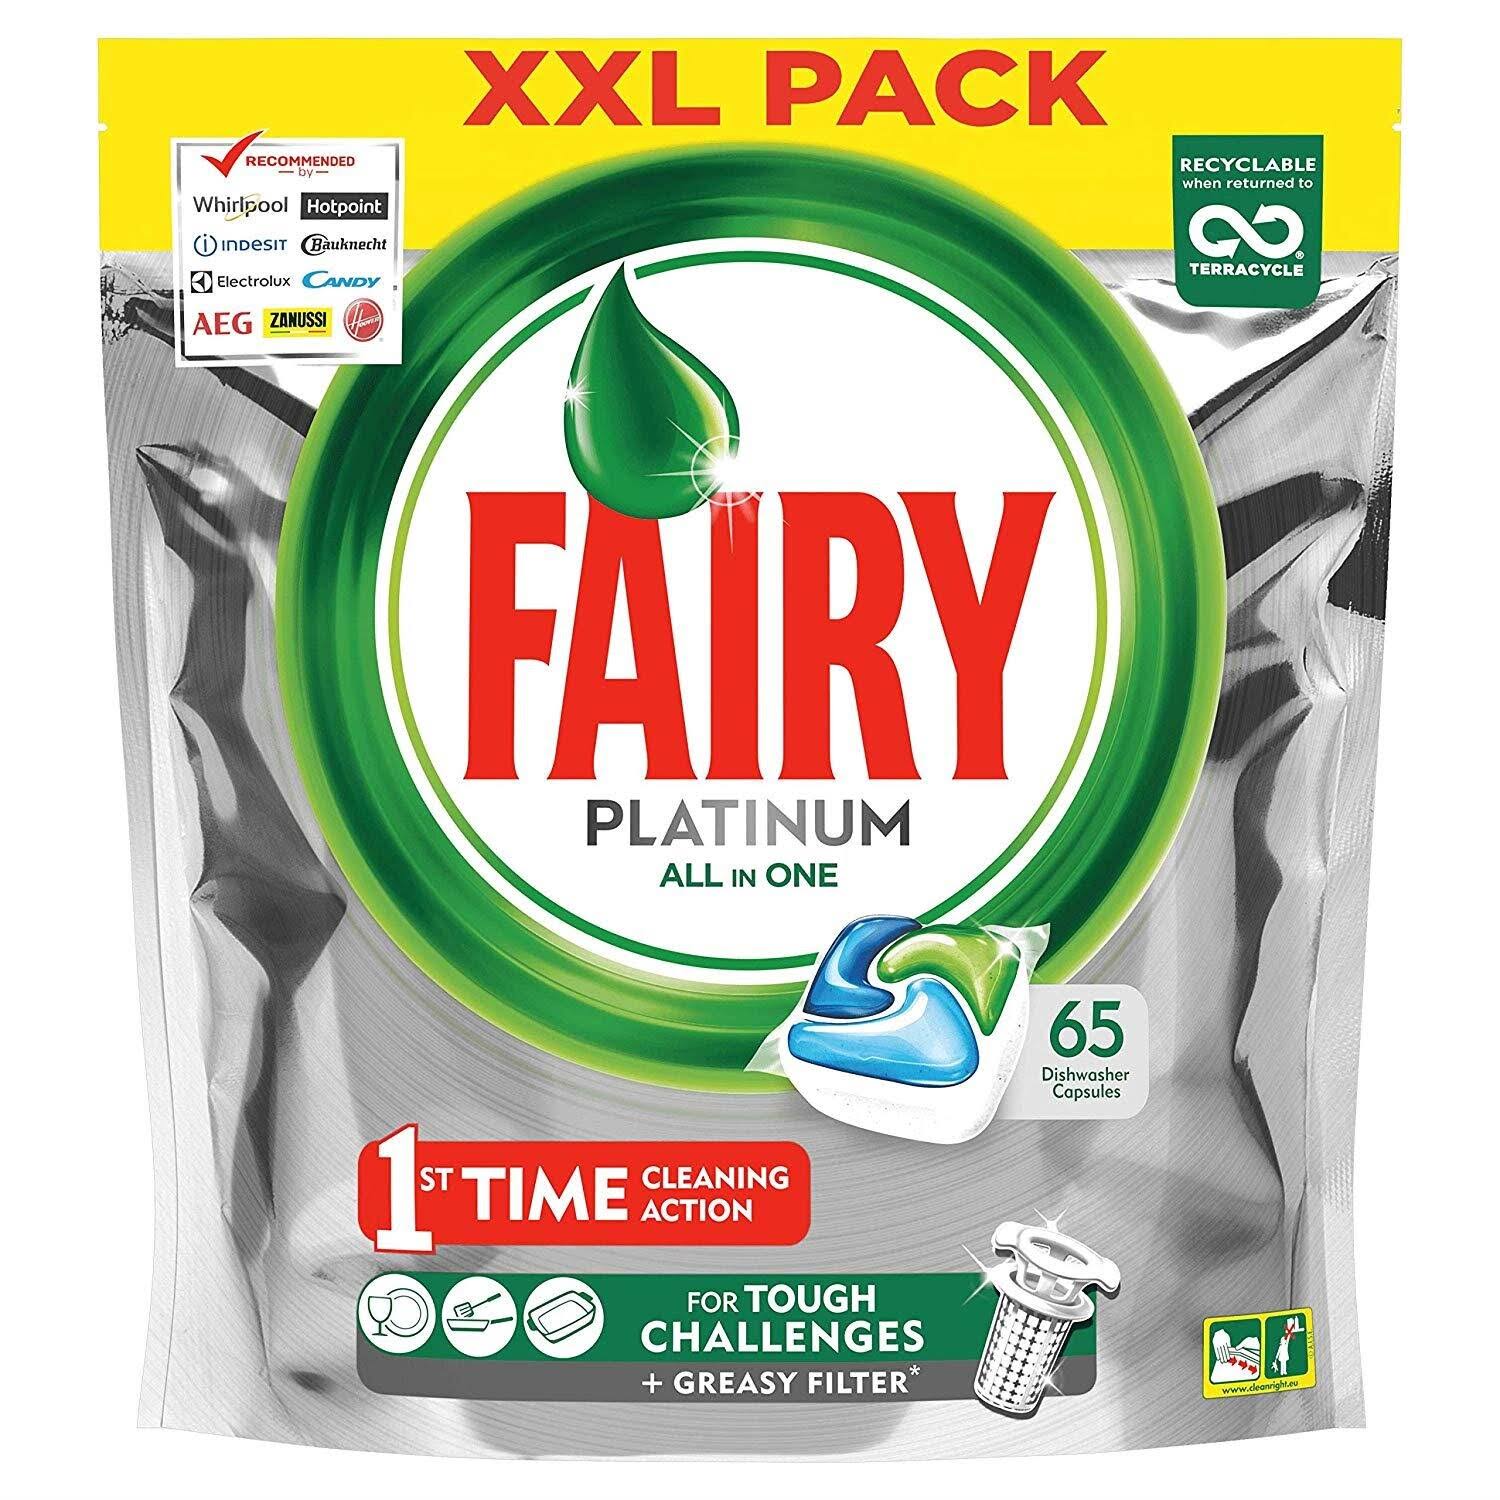 Fairy Platinum Dishwasher Tablets Original All-in-One Soft Pouches - XXL 65 Pack